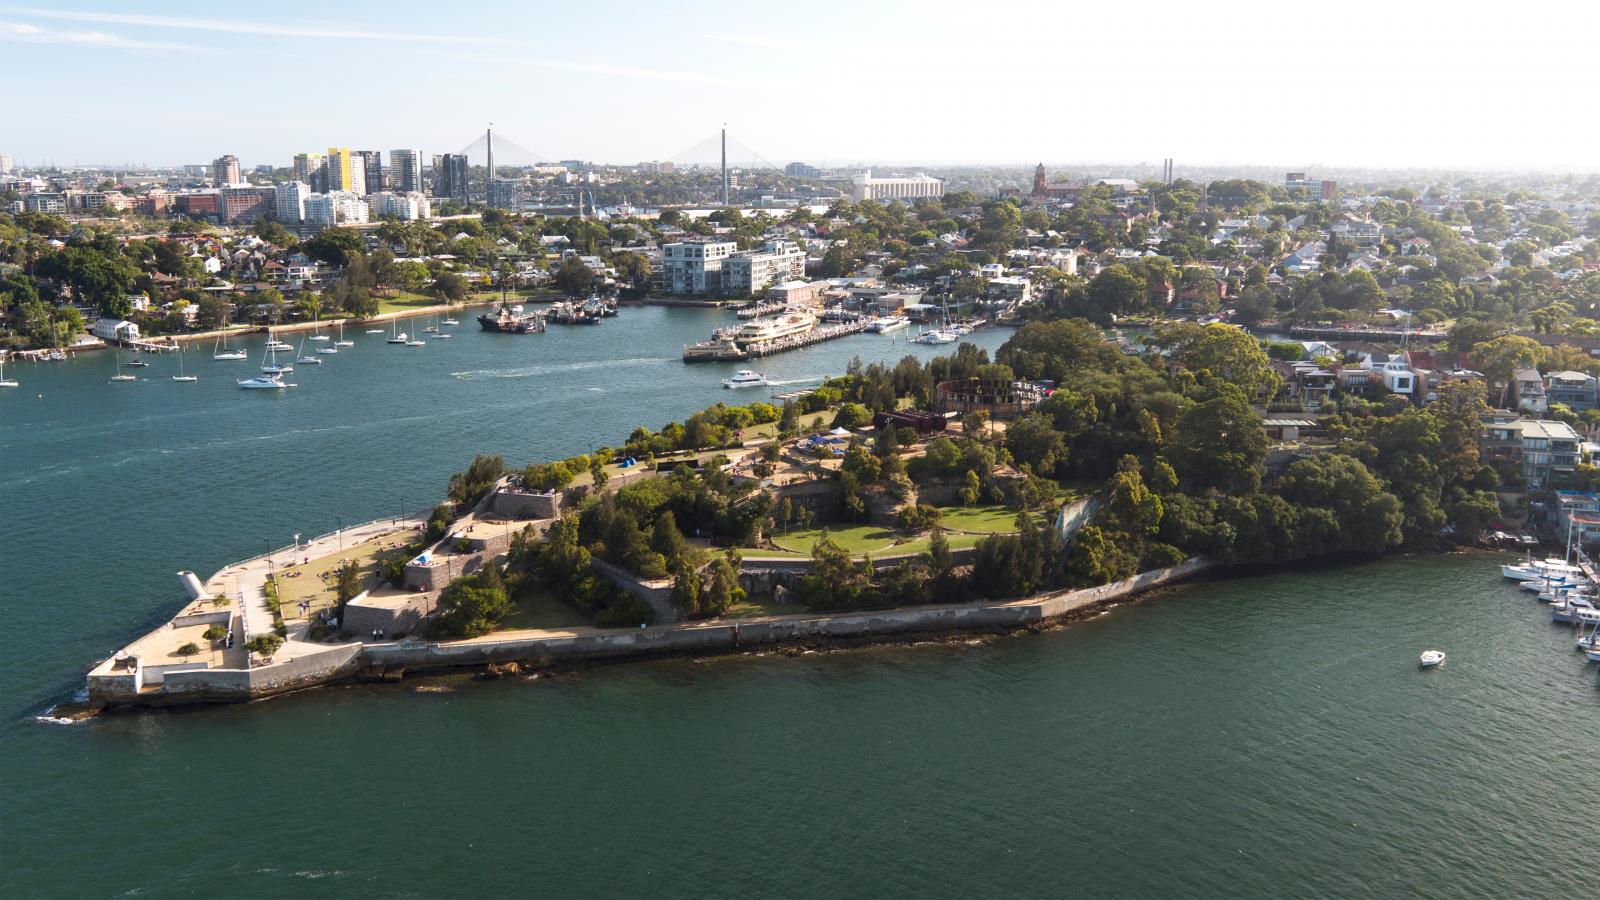 Aerial view of a lush, green peninsula extending into a body of water, surrounded by sailboats and yachts. The shoreline is dotted with parks like Ballast Point Park and residential areas, while a cityscape with tall buildings and bridges is visible in the background under a clear sky.